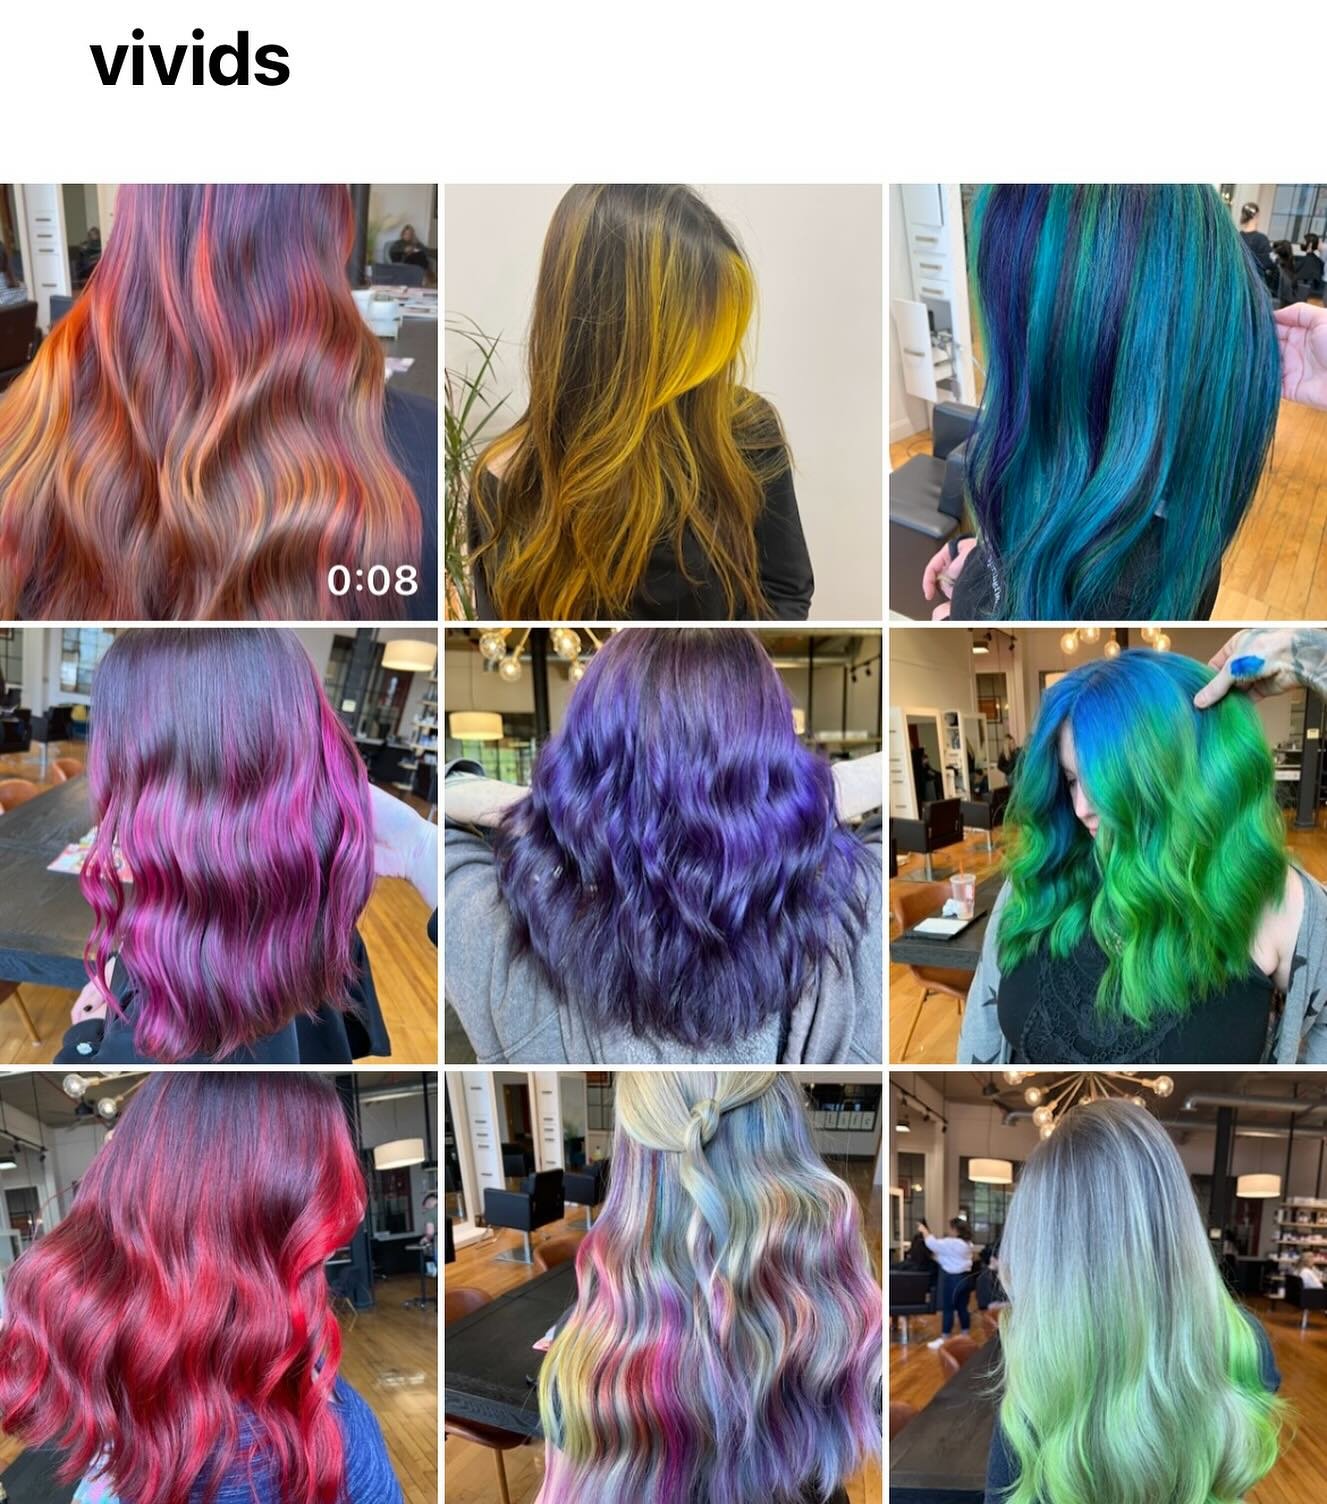 Vivids: so fun but so high maintenance!
Here are just a couple of tips for our color-loving clients:
💚Use professional color protecting shampoo, conditioner, and styling products (our fave: the Vitamino Color line from L&rsquo;Or&eacute;al Professio